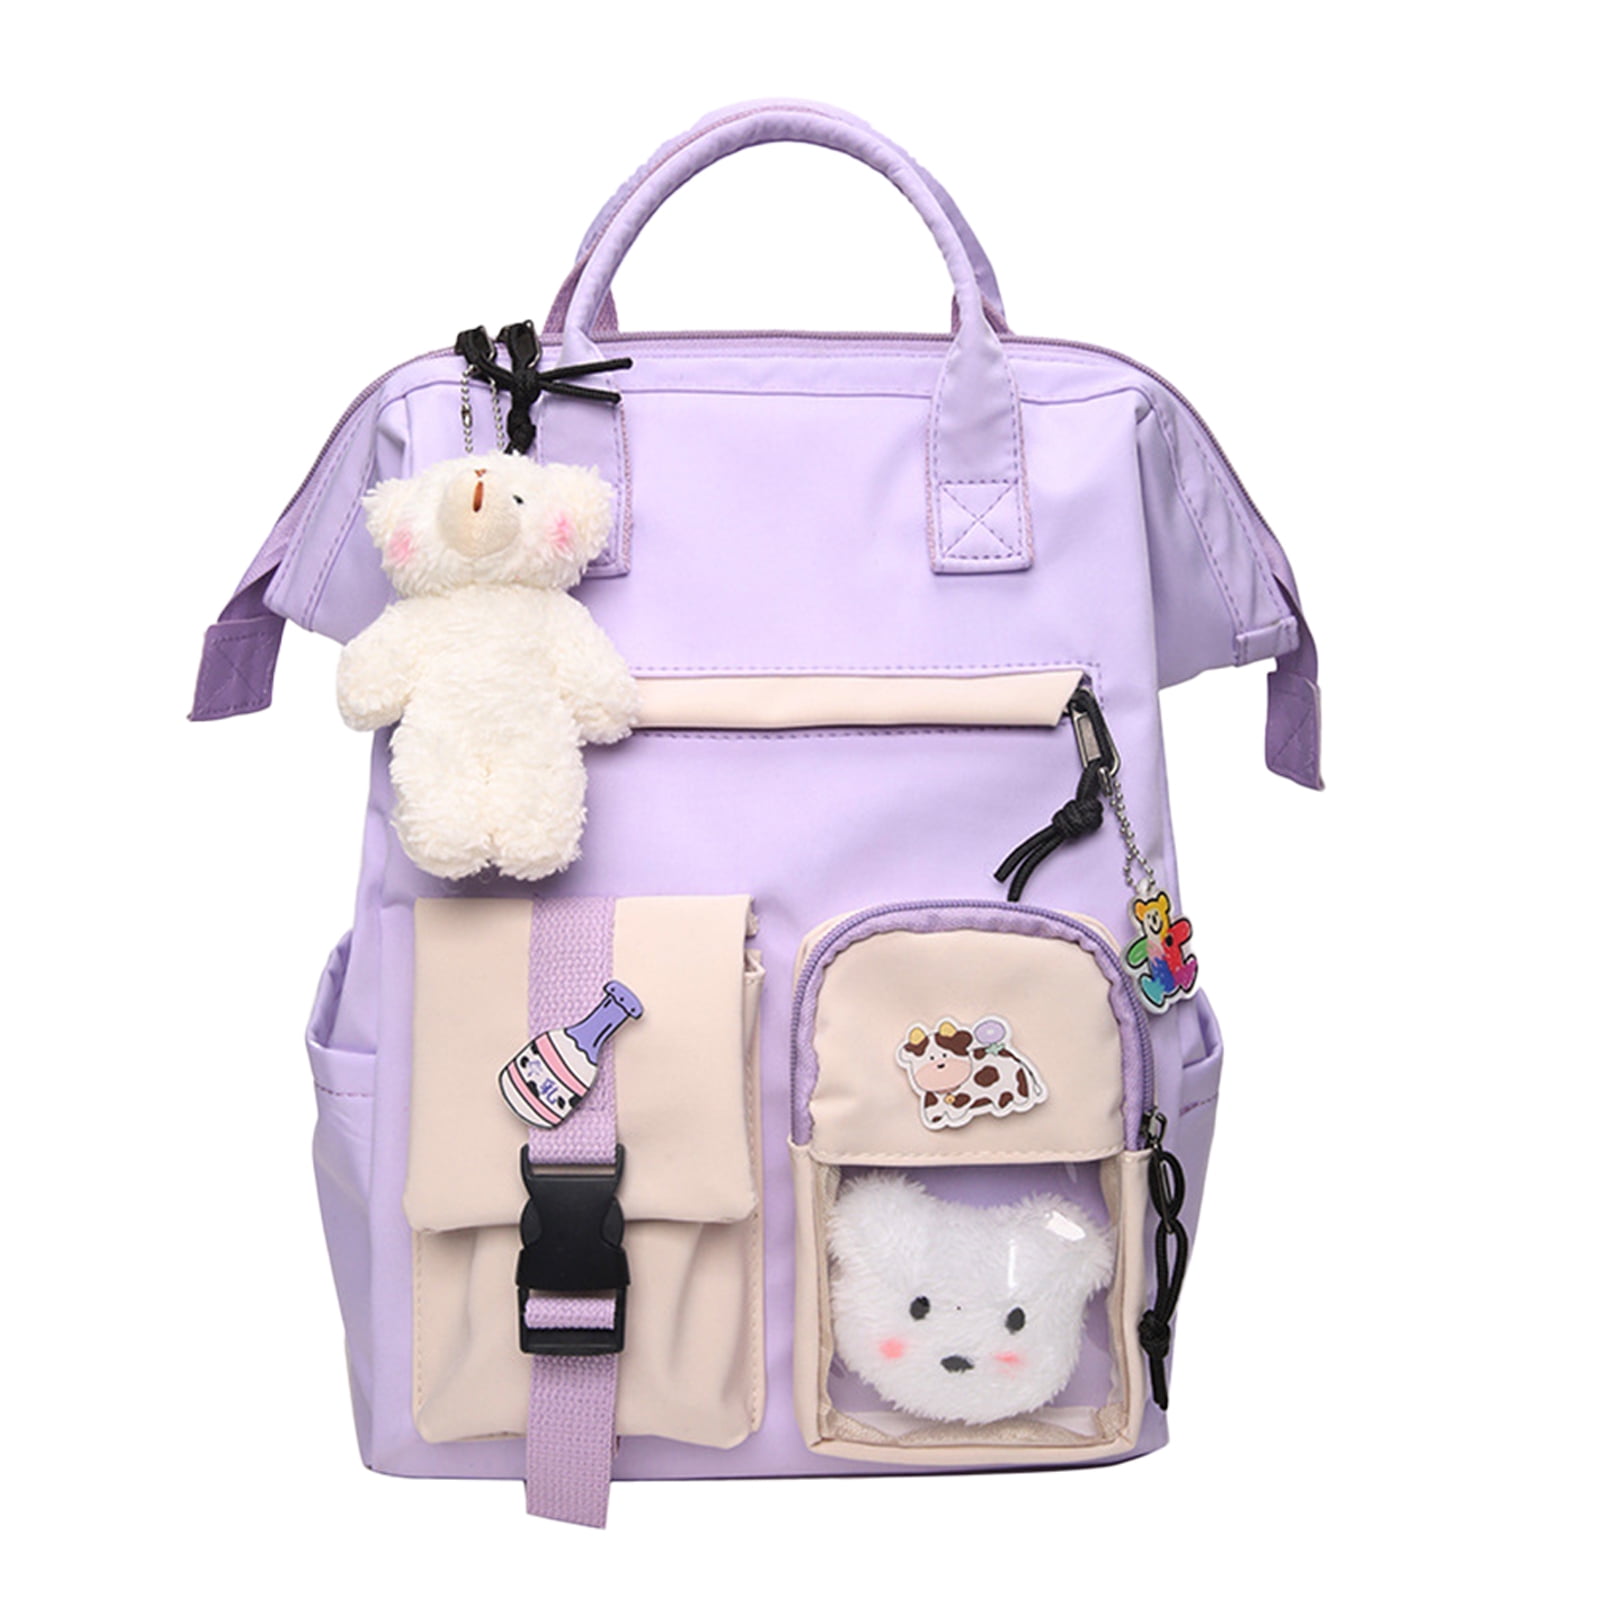 Laptop Backpack Boys Grils Colorful Doodle Lions School Bookbags Computer Daypack for Travel Hiking Camping 